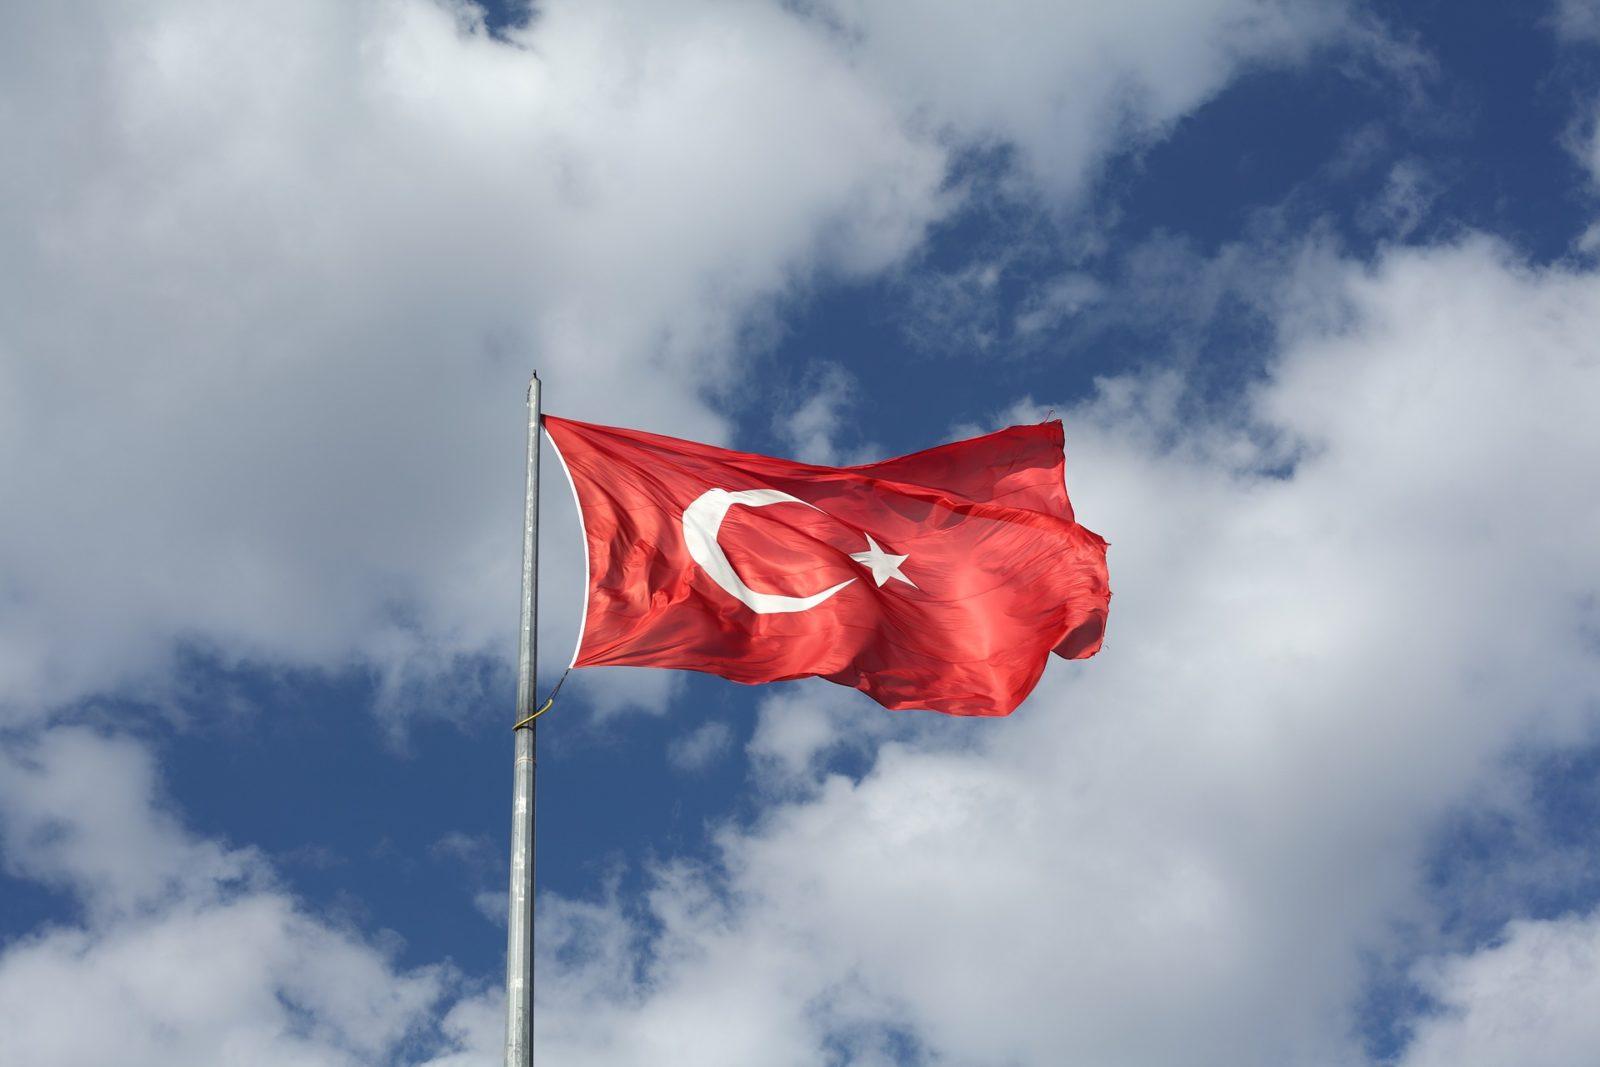 Turkey will not recognize annexation of Crimea, ambassador says 4